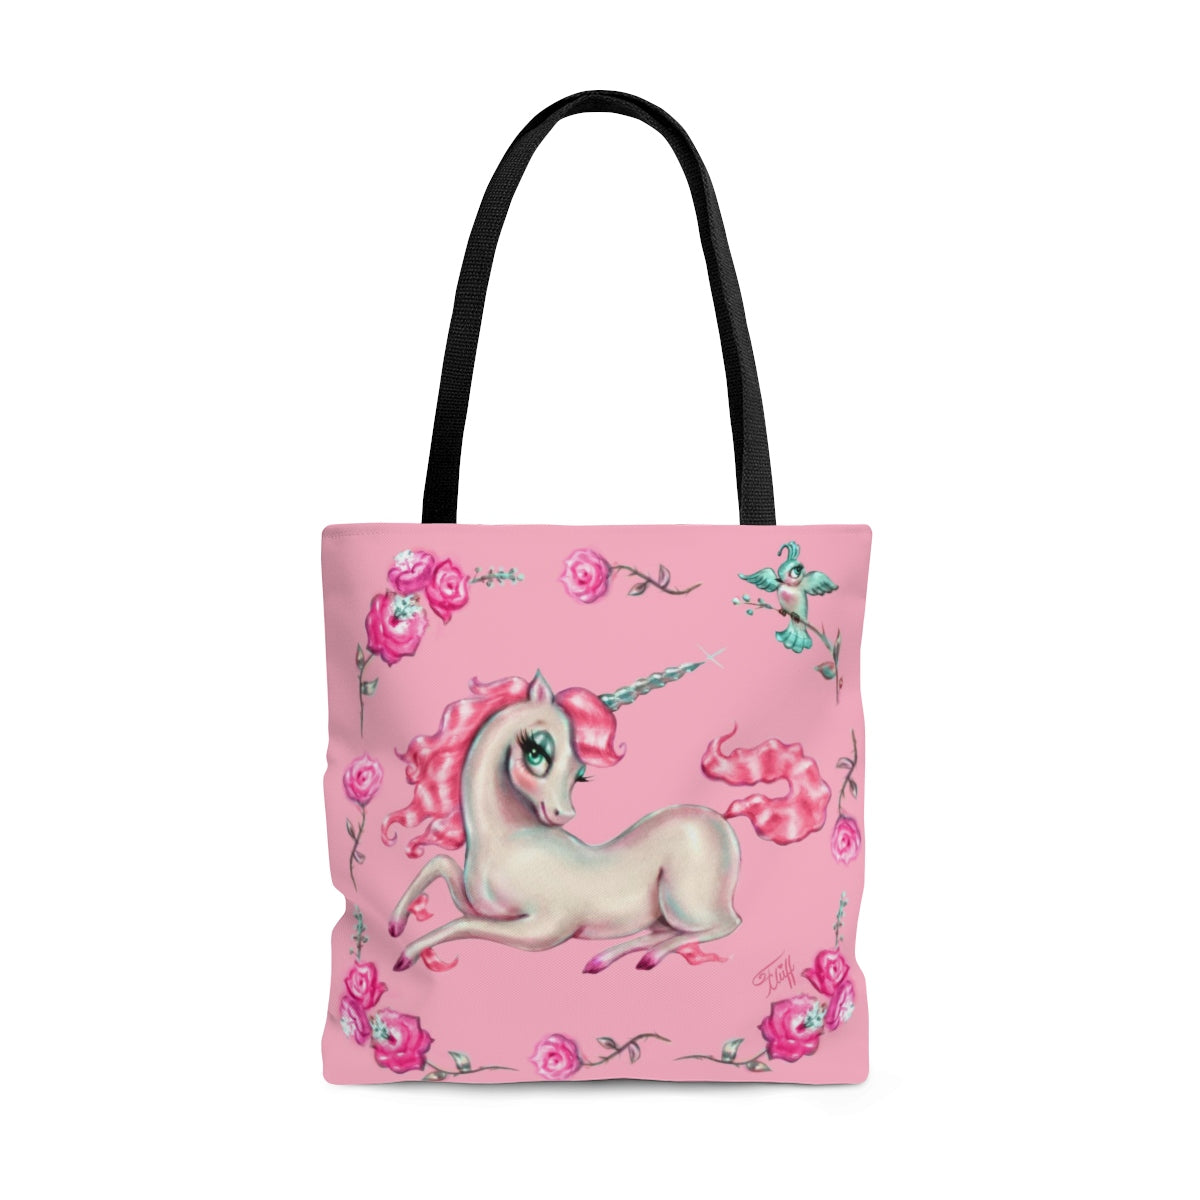 Unicorns and Roses on Pink • Tote Bag